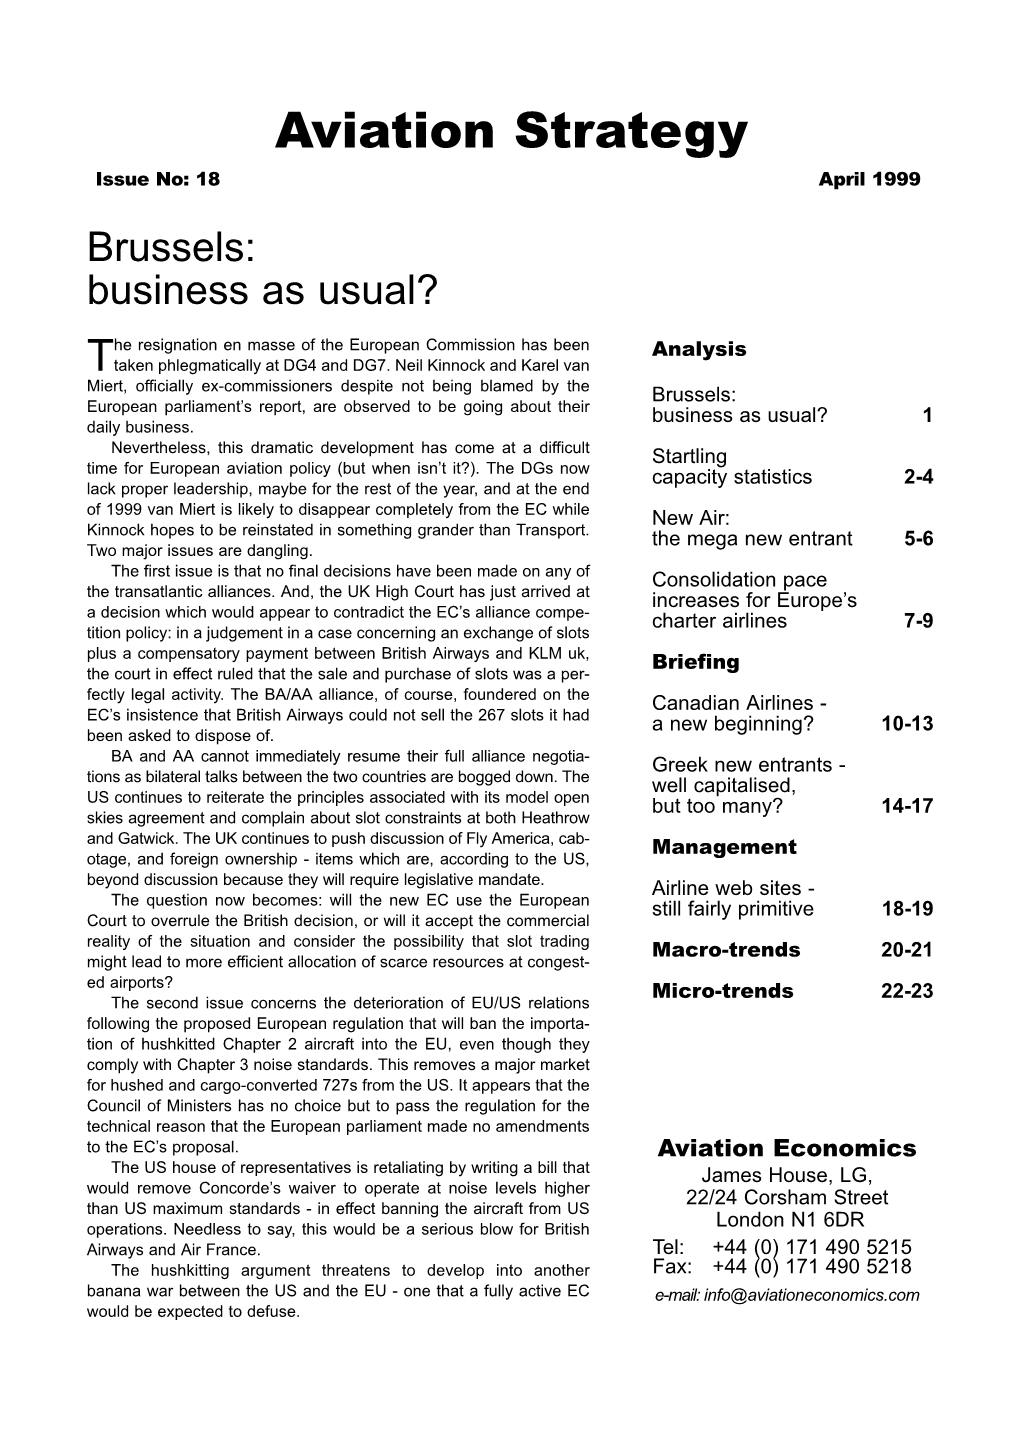 April 1999 Brussels: Business As Usual?